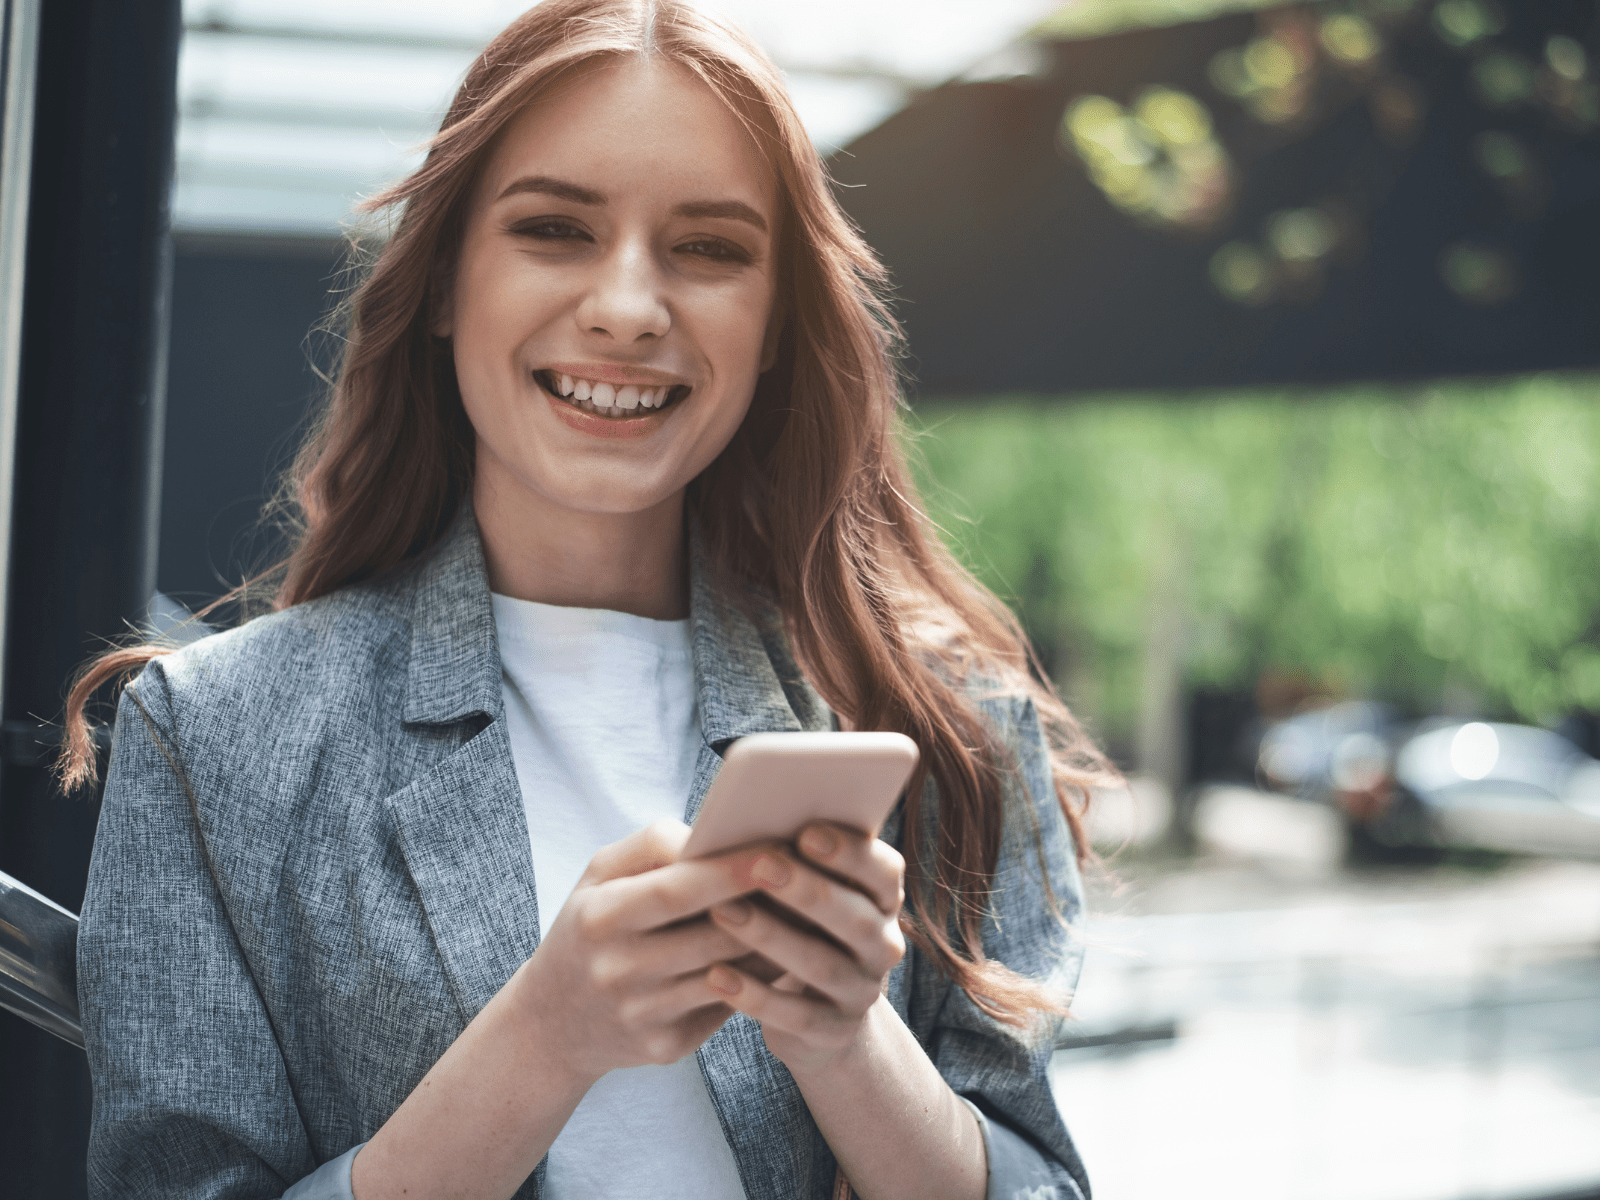 young woman smiling holding her mobile phone